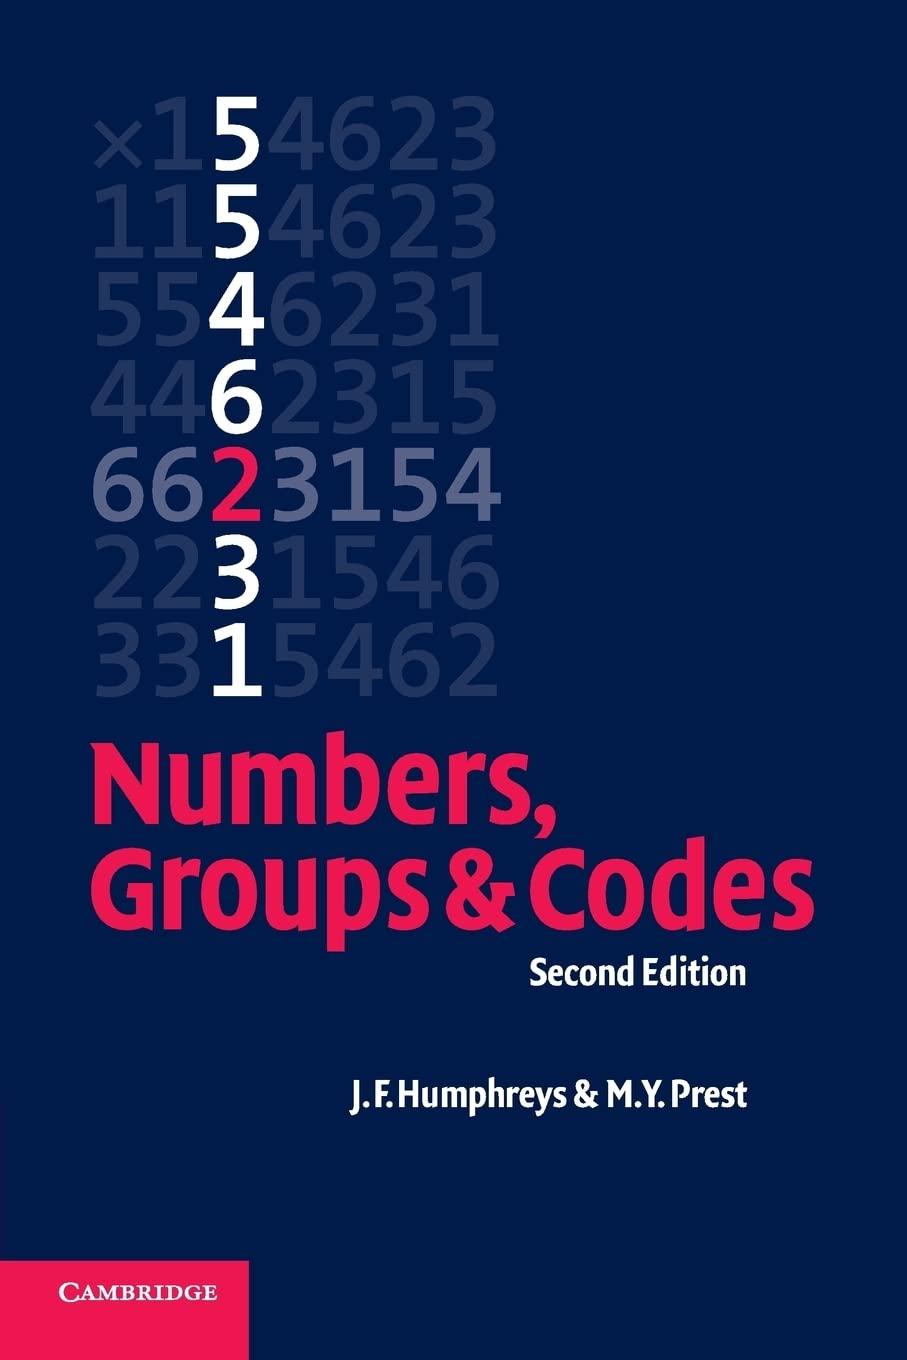 numbers groups and codes 2nd edition j. f. humphreys, m. y. prest 052154050x, 9780521540506